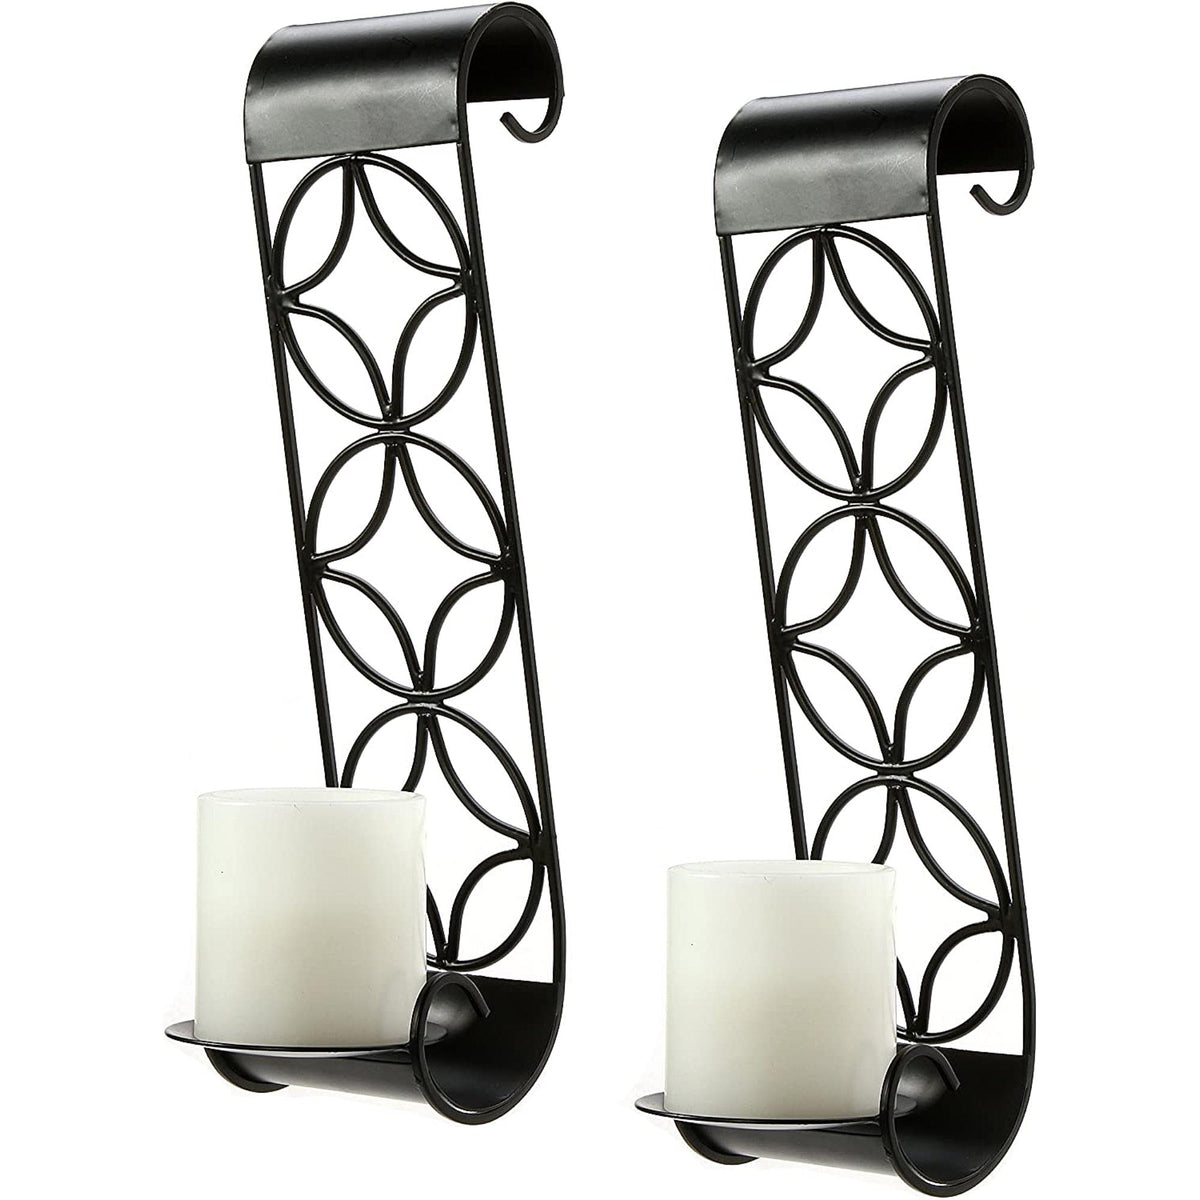 HOSLEY® Iron Wall Sconces,  Black Color, Set of 2,  14 inches High